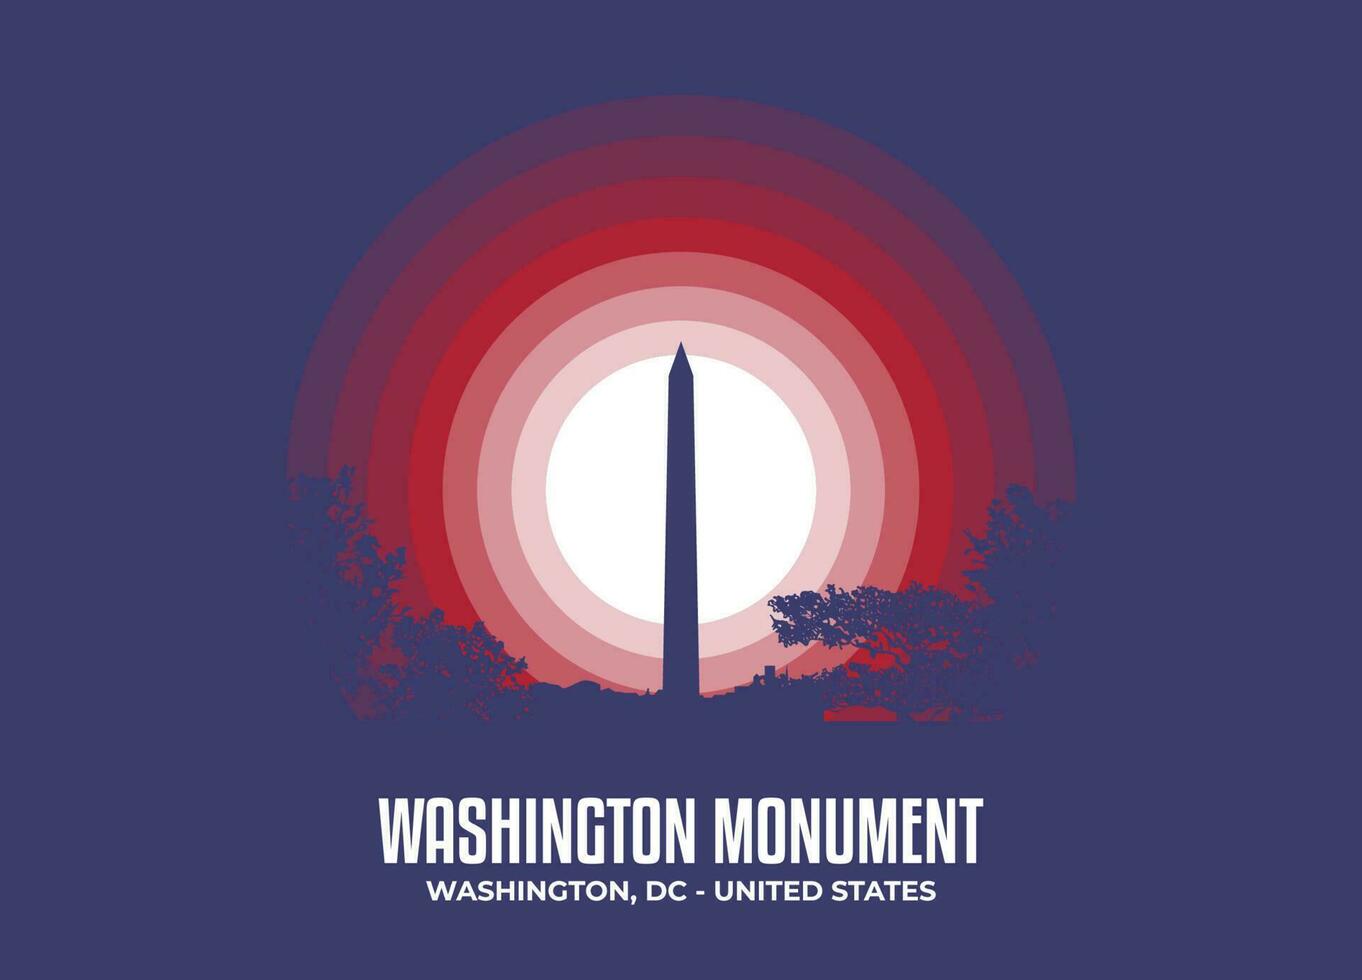 Washington Monument. Moonlight illustration of famous historical statue and architecture in United States of America. Color tone based on flag. Vector eps 10